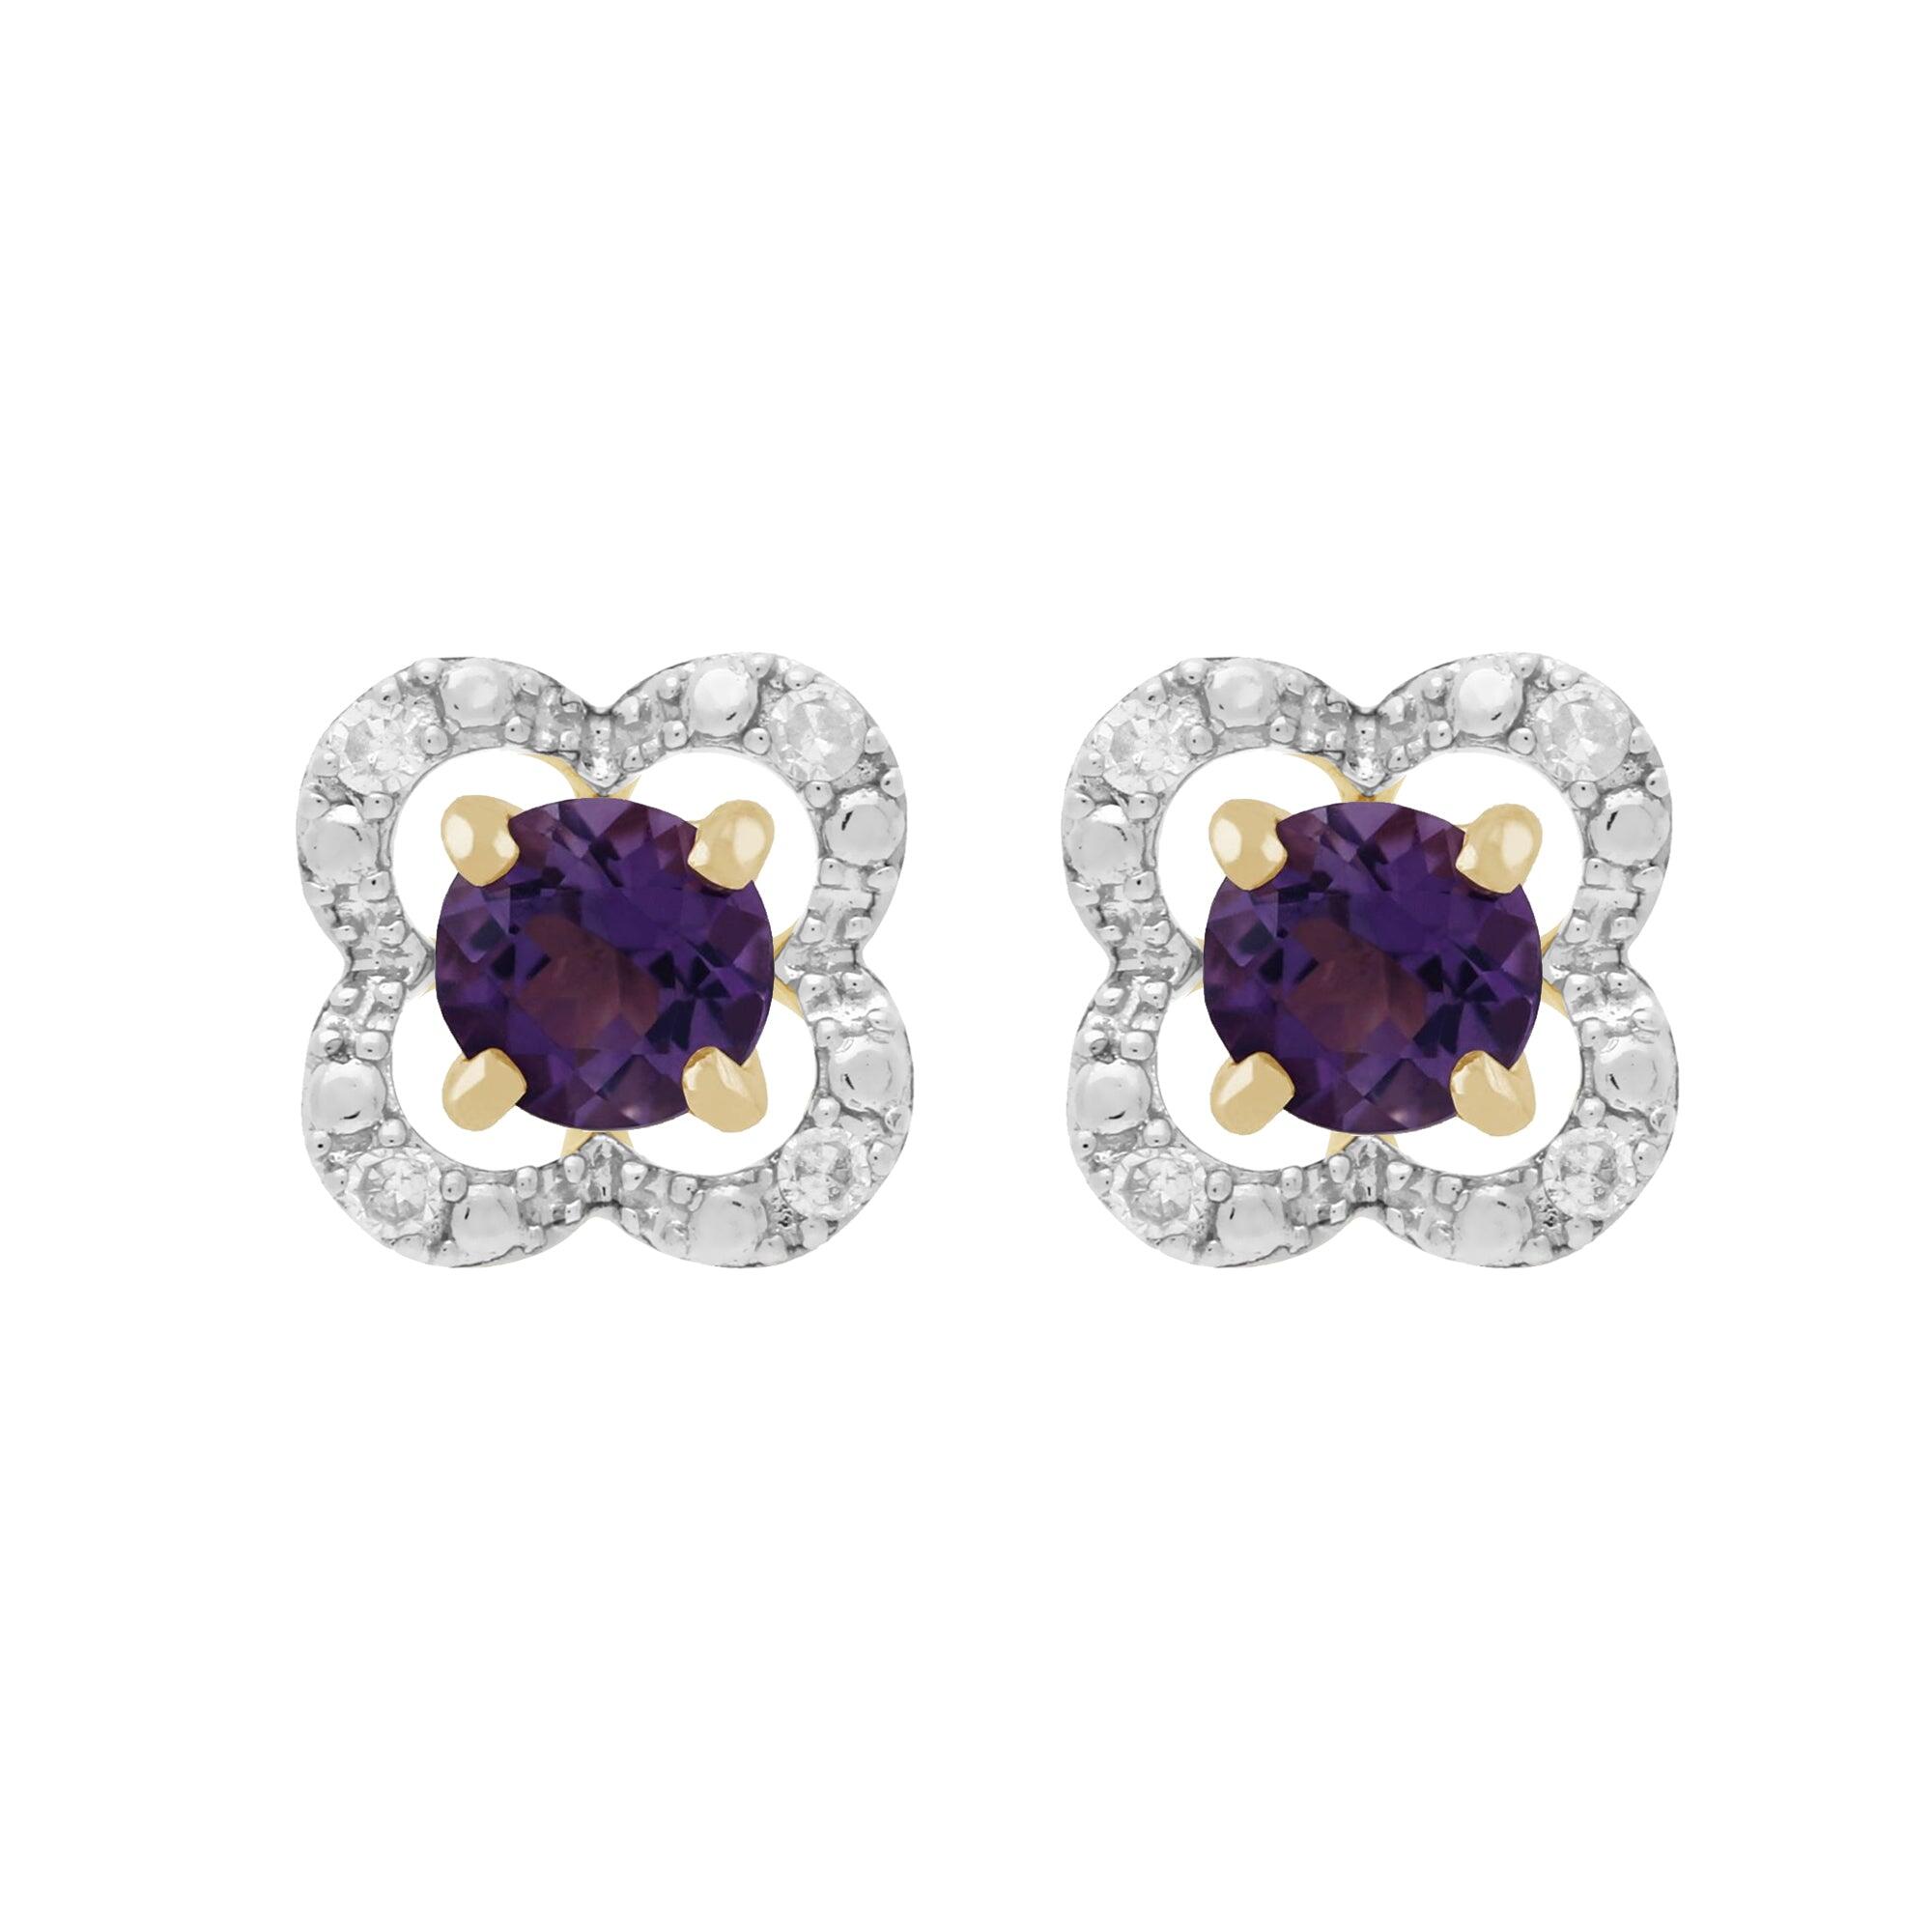 Classic Round Amethyst Stud Earrings with Detachable Diamond Floral Ear Jacket in 9ct Yellow Gold